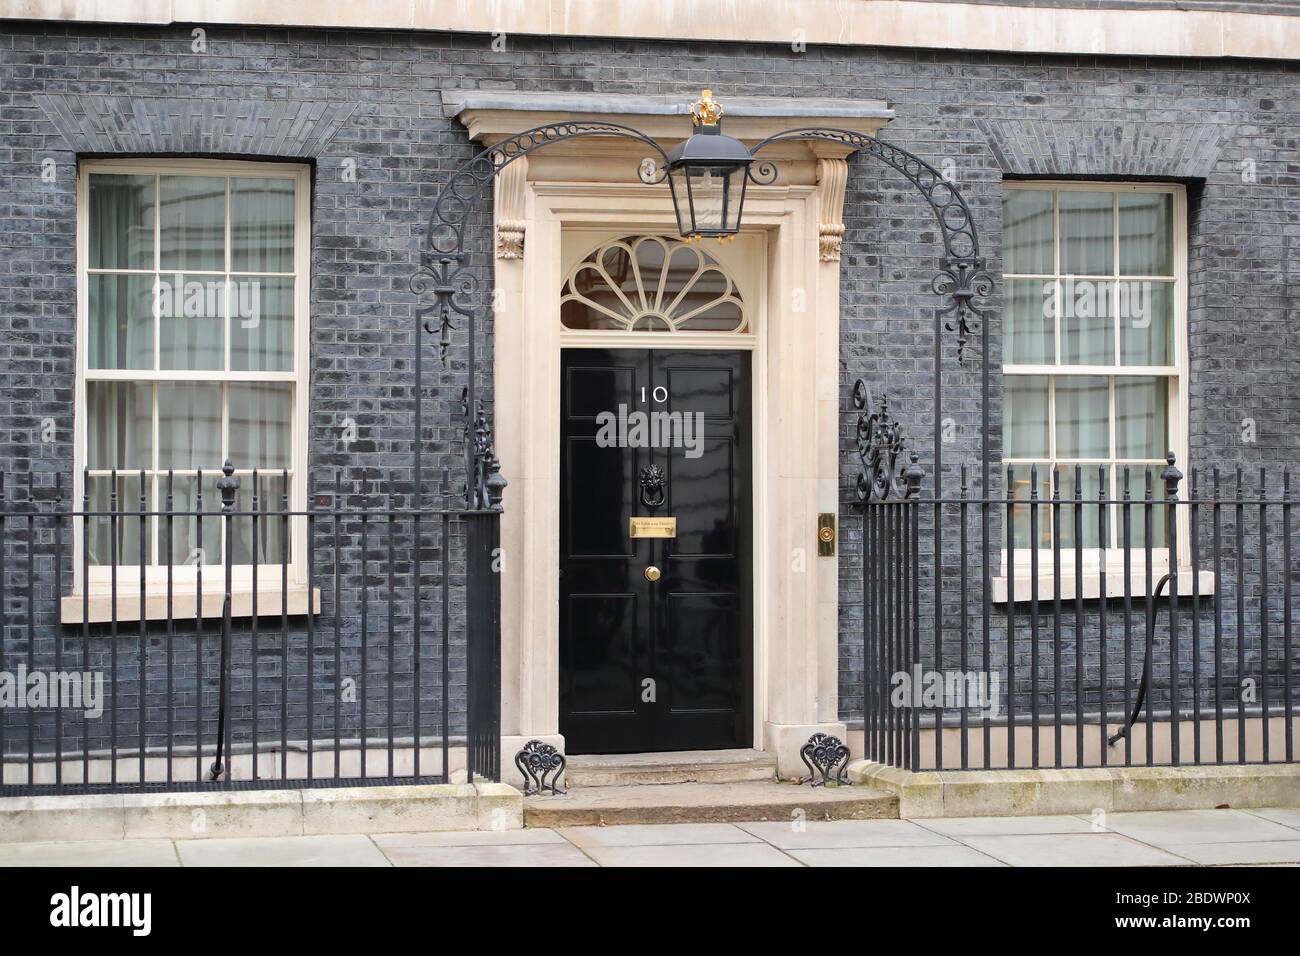 Entrance To Downing Street Number 10 The Official Residence Of The British Prime Minister London Uk Stock Photo Alamy